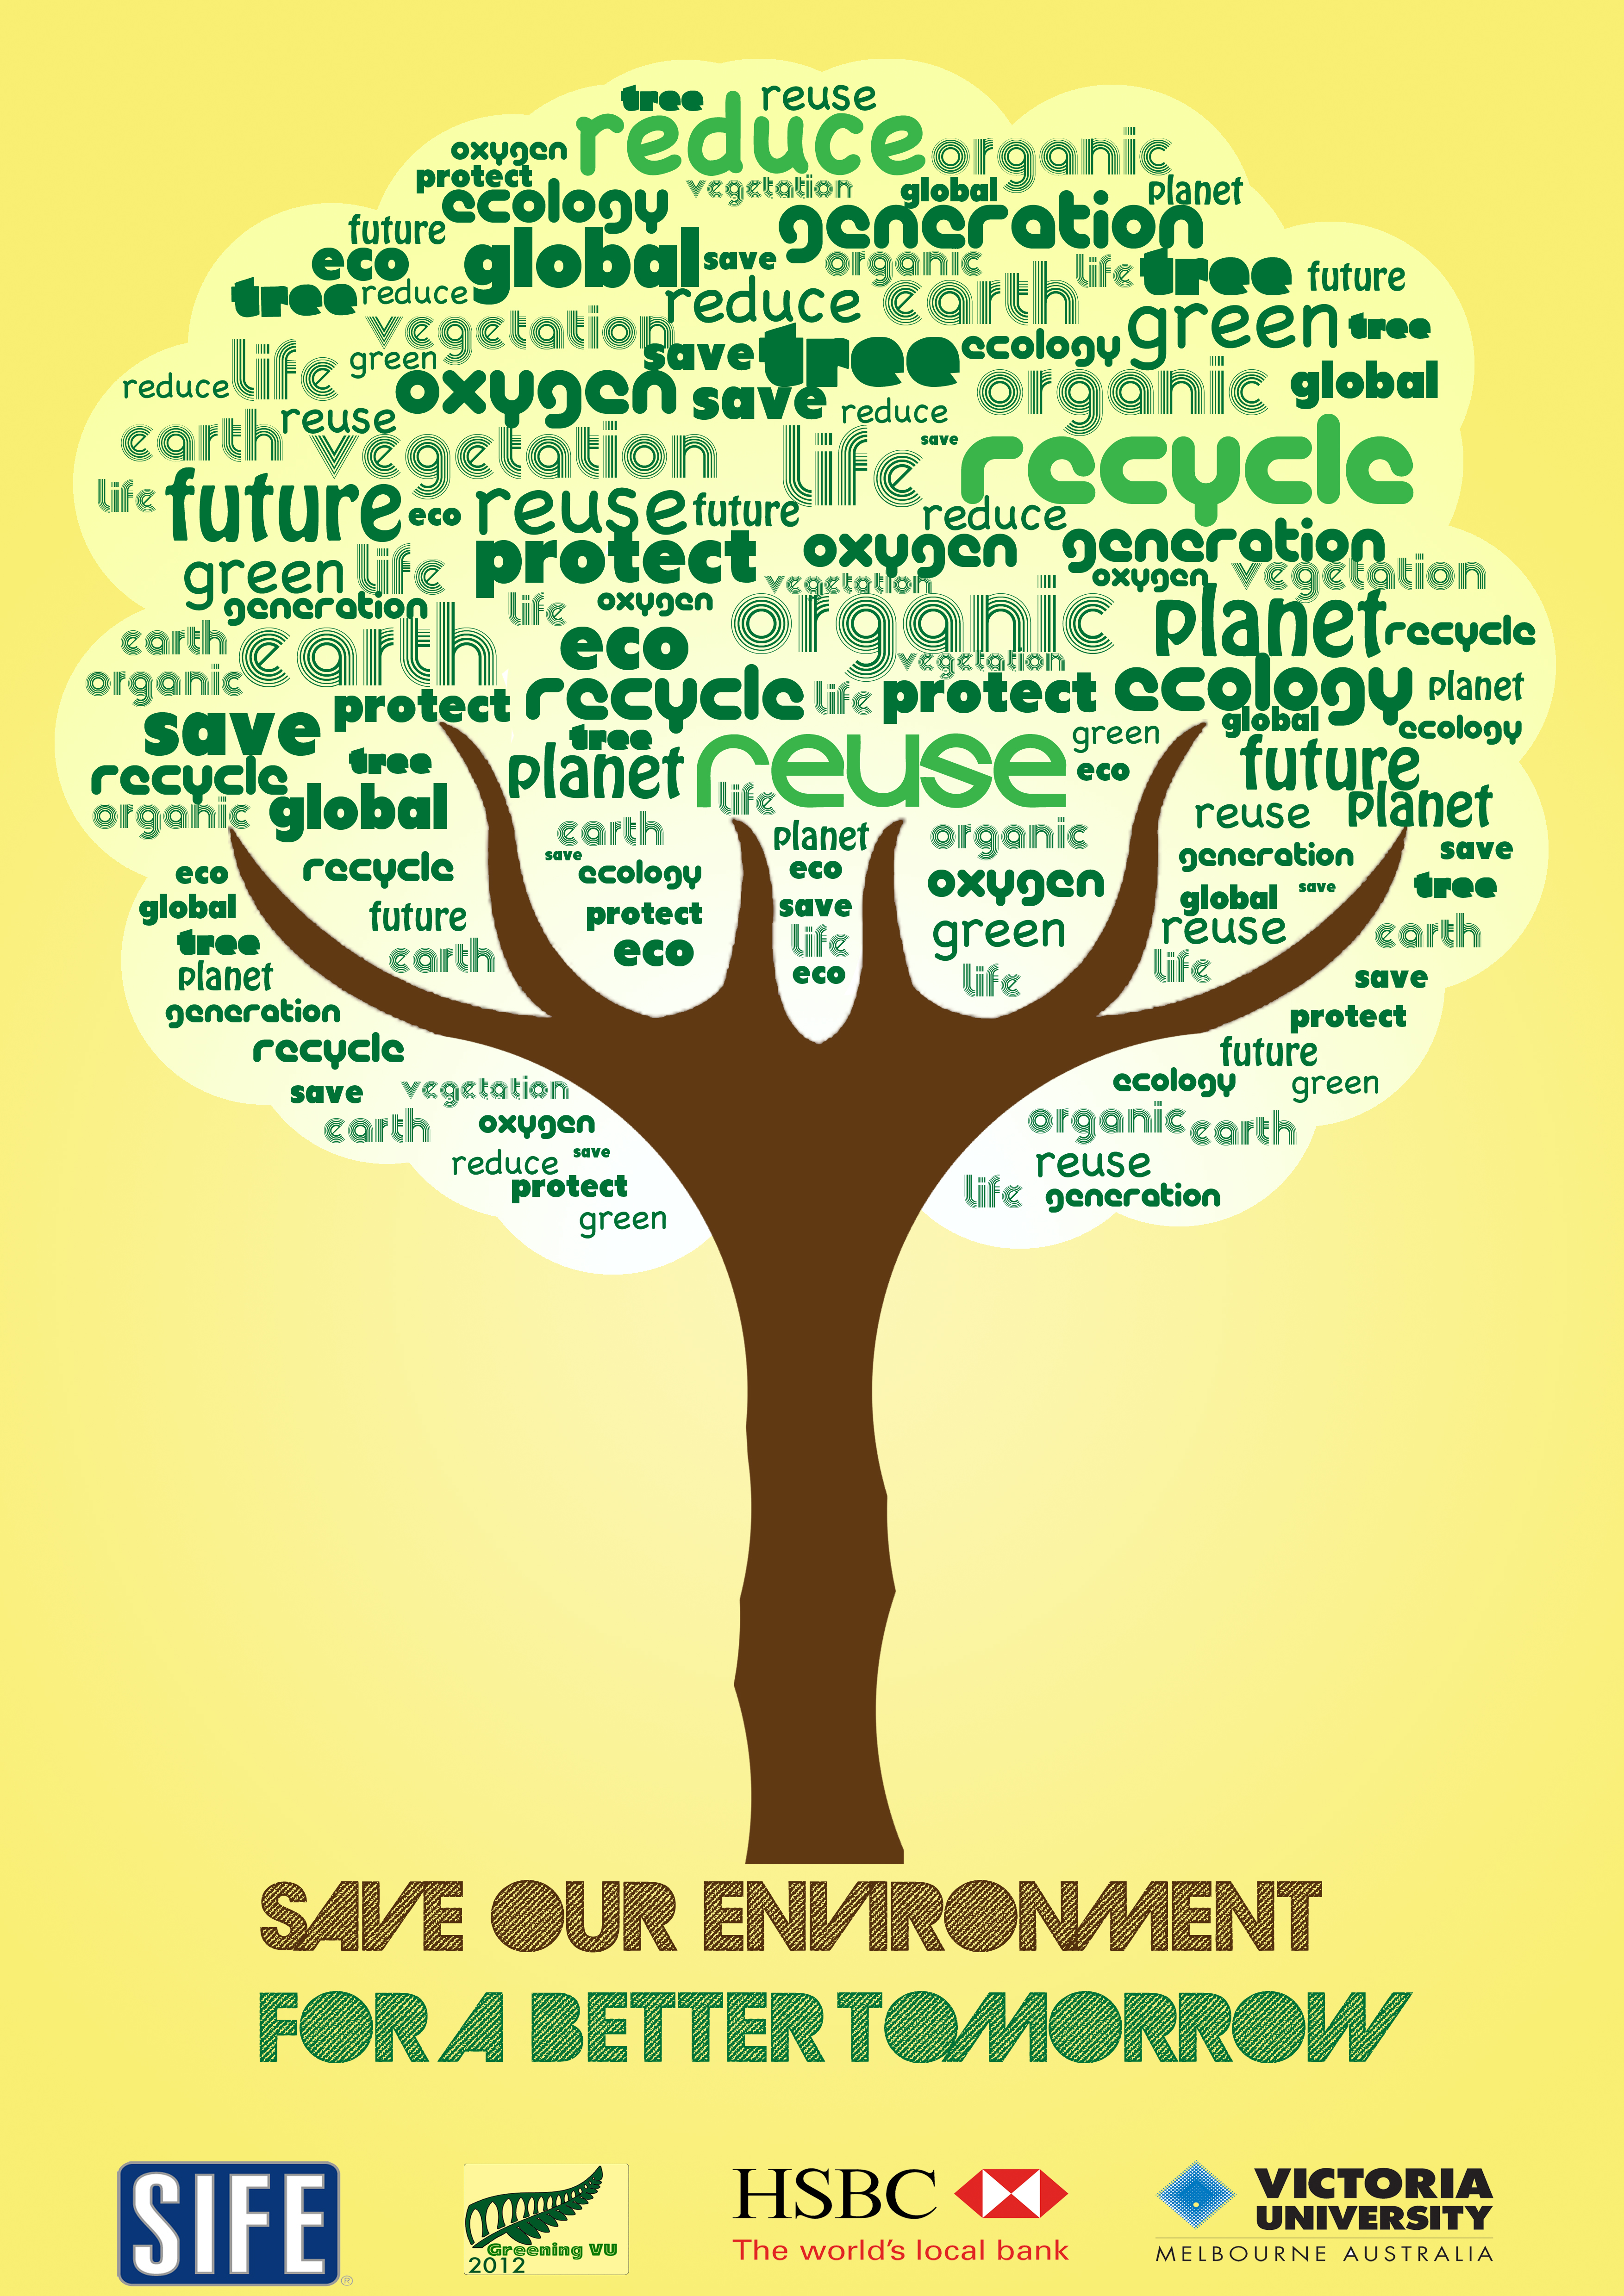 posters on save environment in hindi